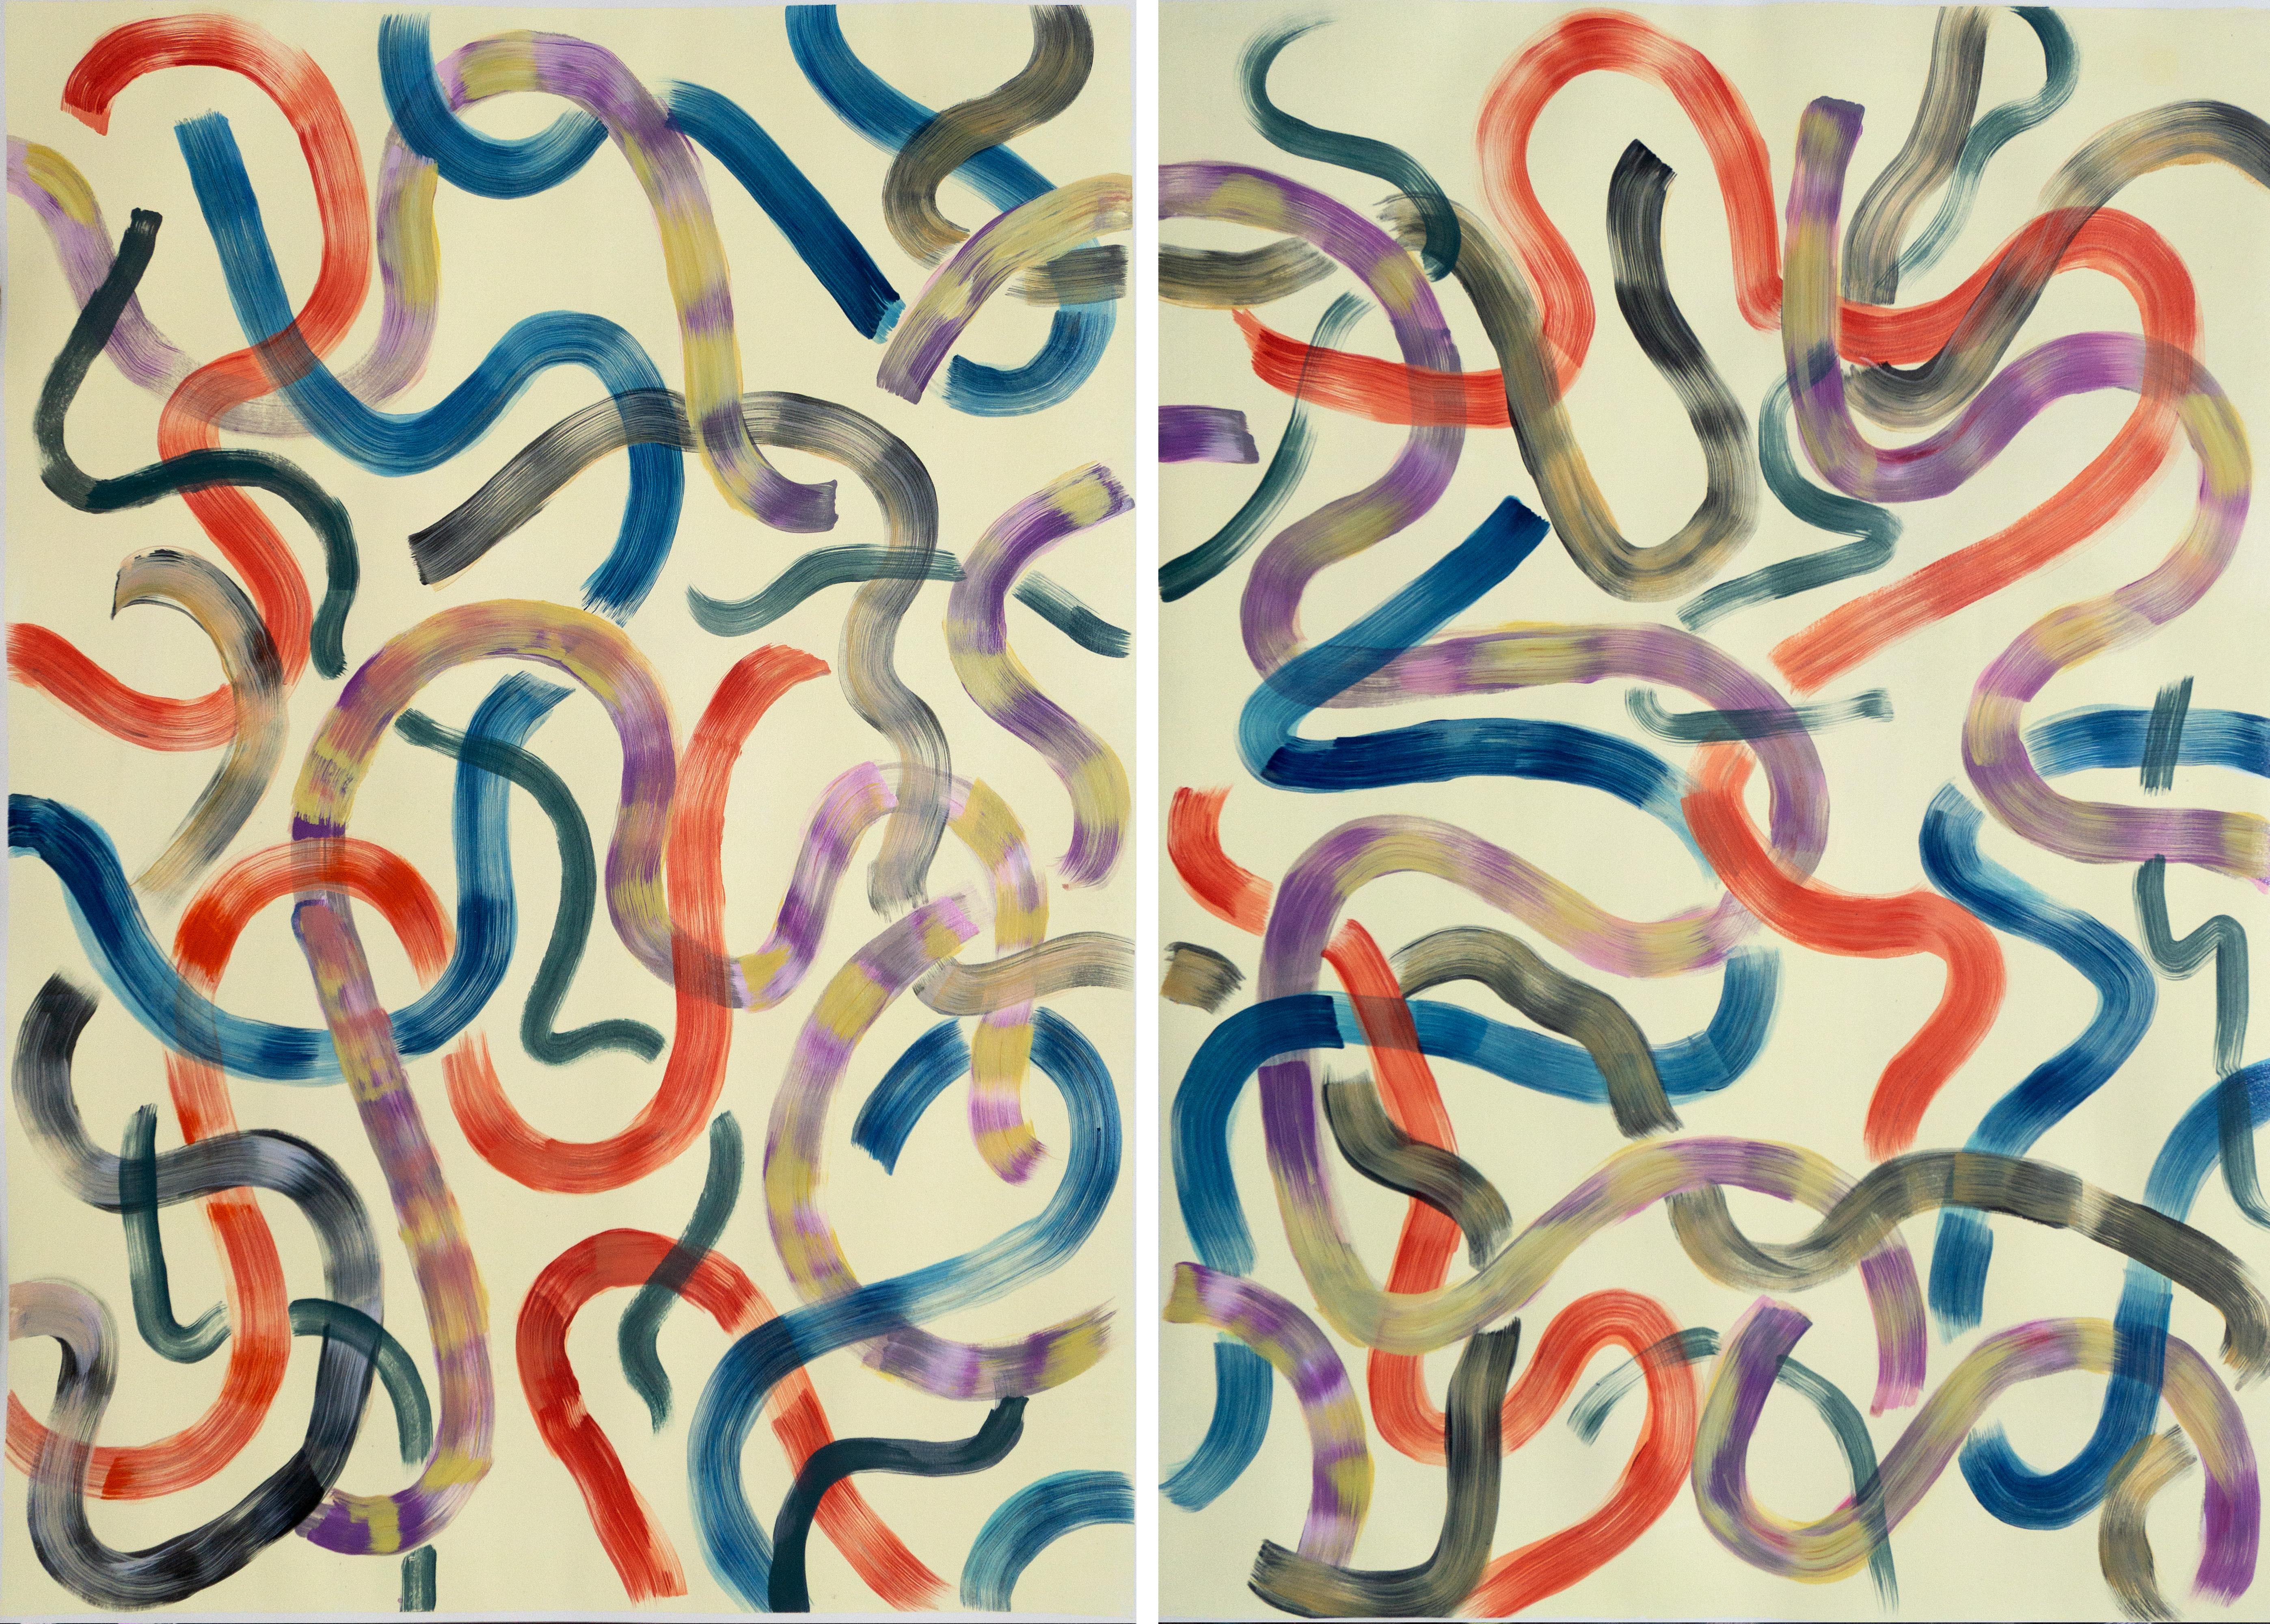 Kind of Cyan Still-Life Painting - Colorful Abstract Forms on Vanilla, Diptych, 100x140cm, Acrylic, Abstract Art